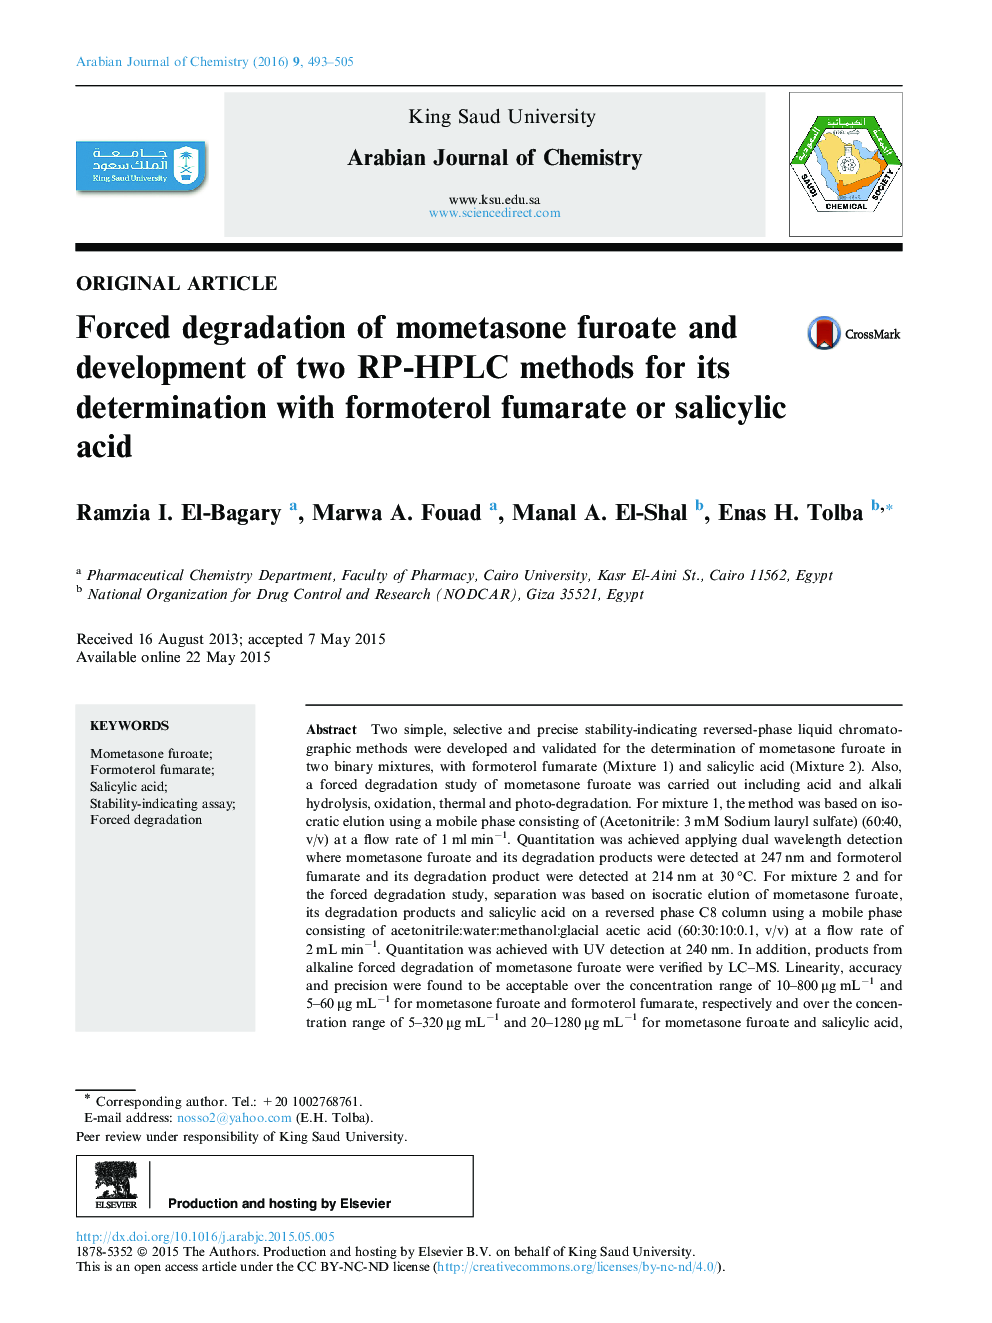 Forced degradation of mometasone furoate and development of two RP-HPLC methods for its determination with formoterol fumarate or salicylic acid 